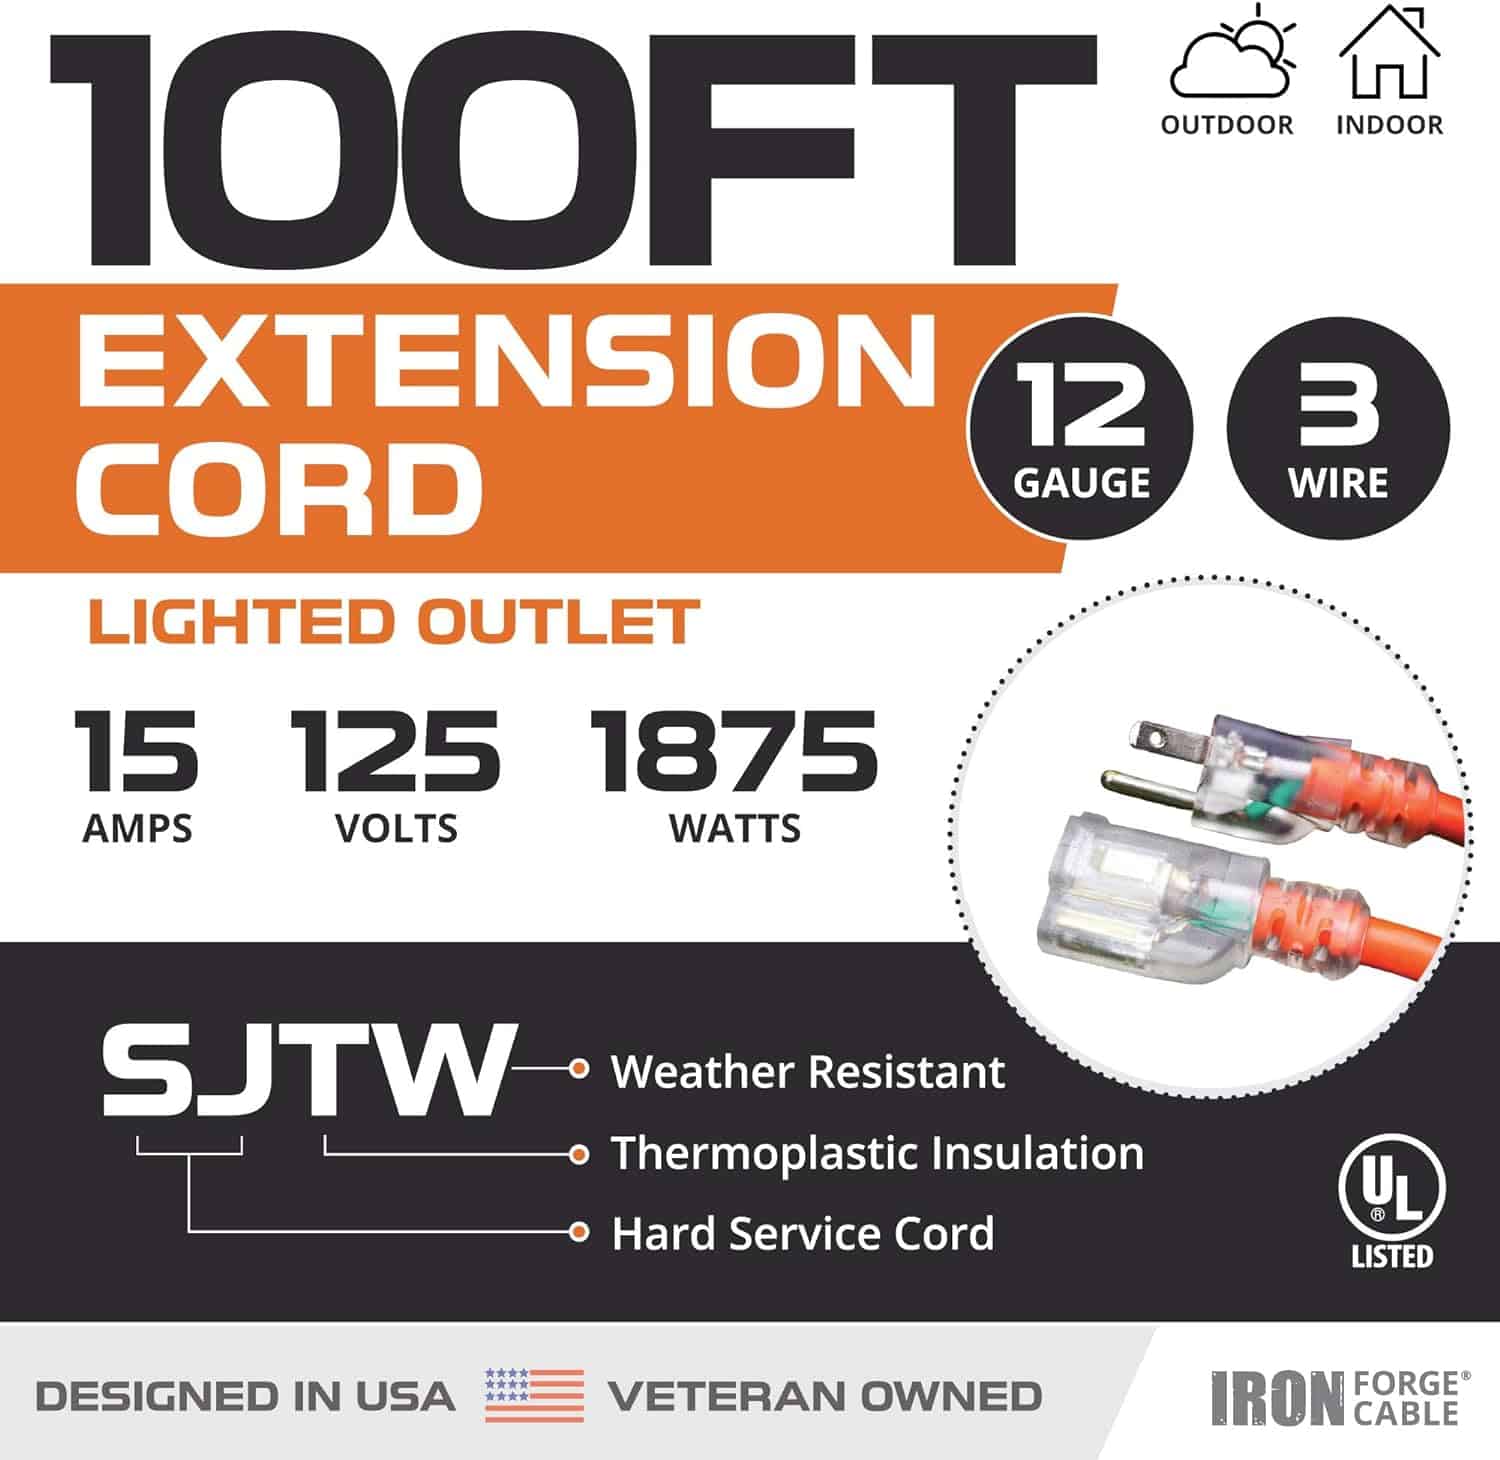 Iron Forge 12 Gauge Outdoor Extension Cord 100 Ft with Lighted End12 3 Heavy Duty Extension Cable with 3 Prong Grounded Plug SJTW Weatherproof Long 2